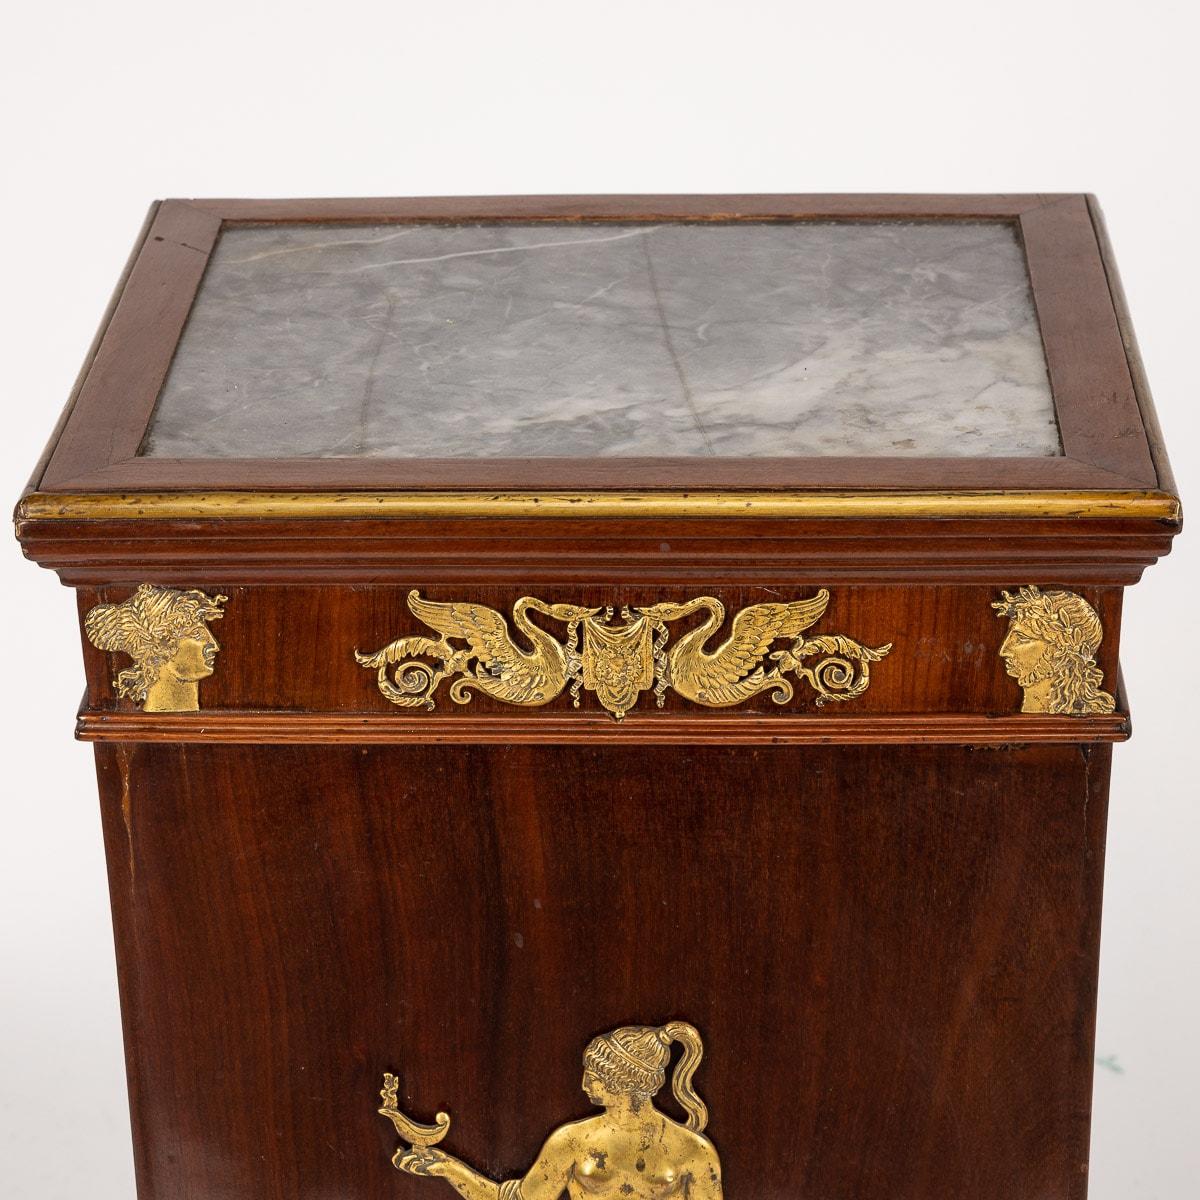 19th Century French Empire Style Ormolu Mounted Wood & Marble Pedestal, C.1890 For Sale 9